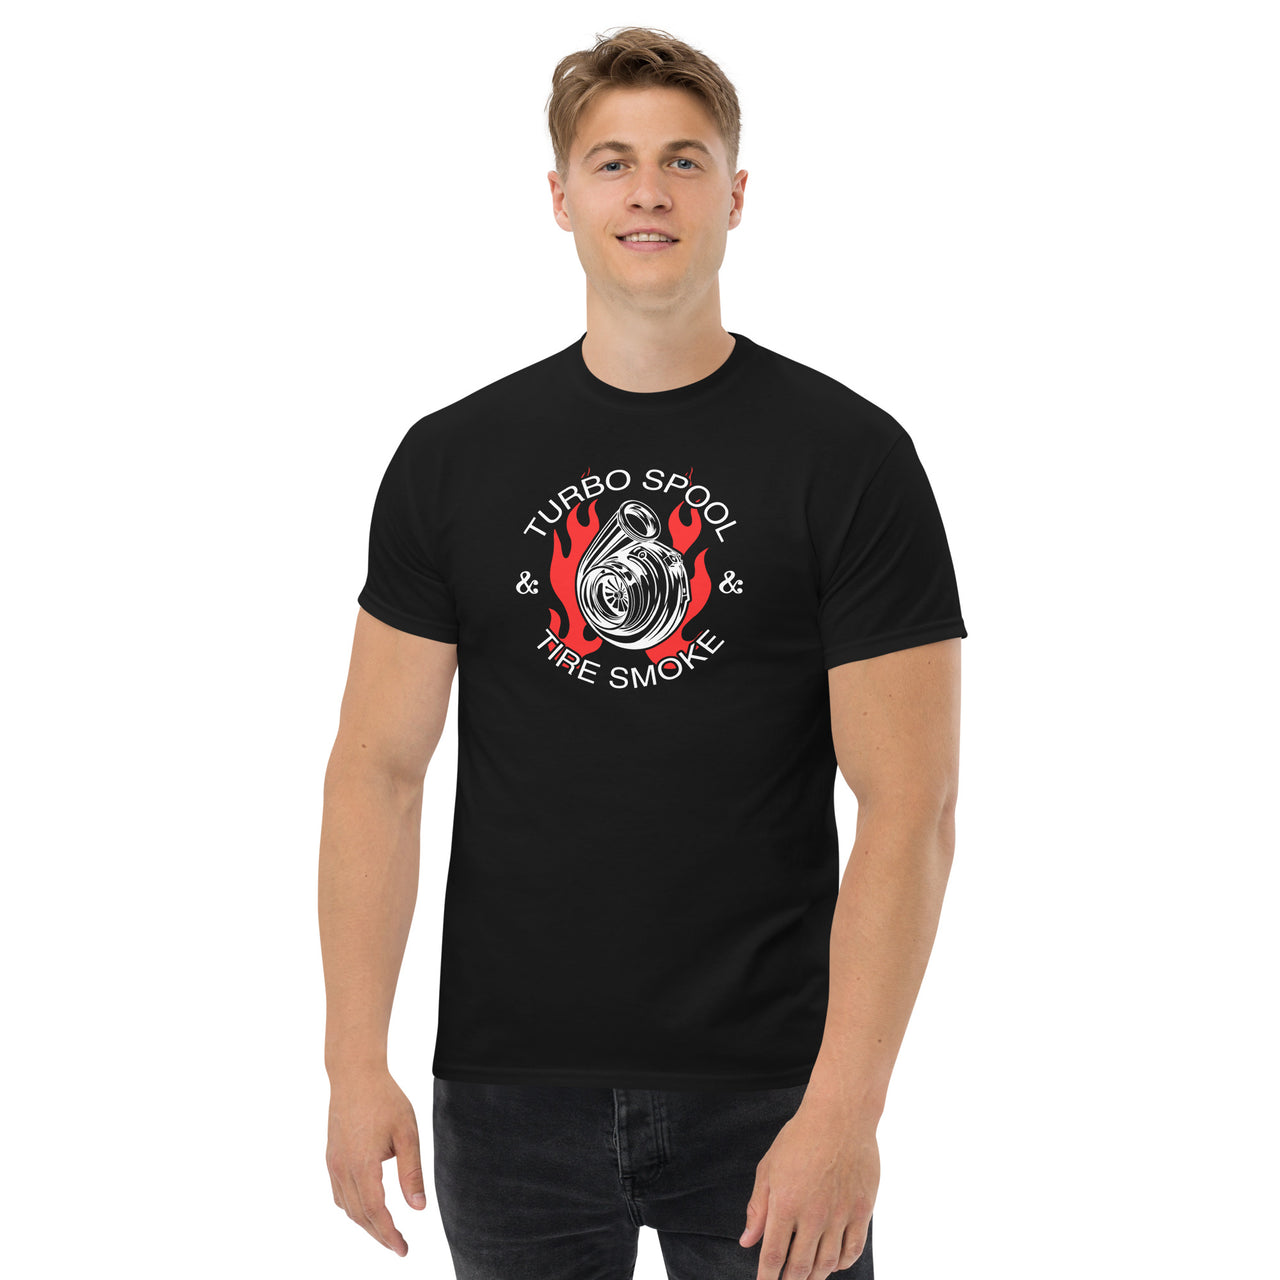 Turbo Spool And Tire Smoke T-Shirt-In-Black-From Aggressive Thread